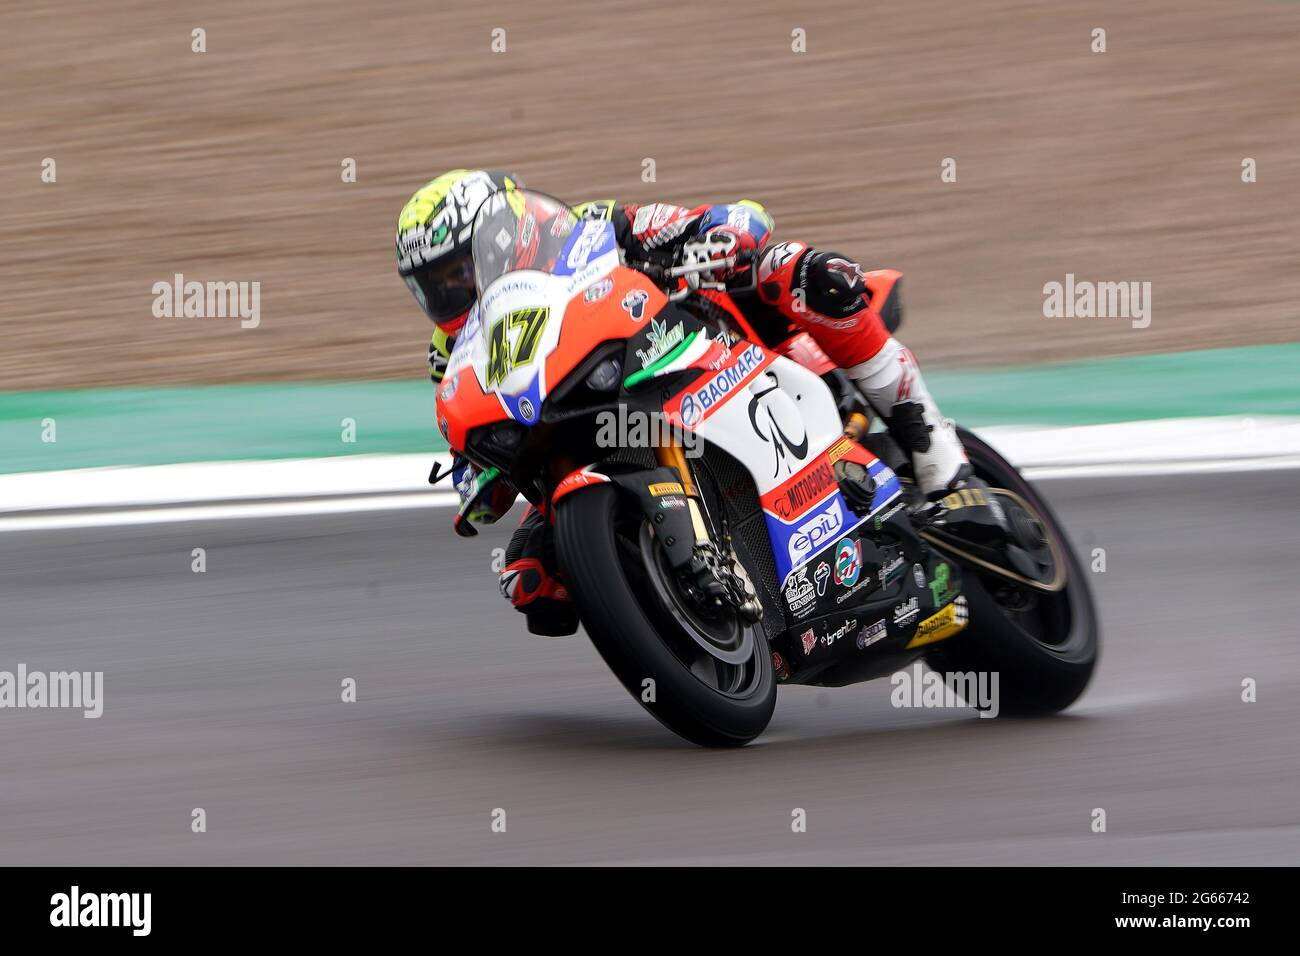 Axel Bassani during day one of the Motul Fim Superbike Championship 2021 at Donington Park, Leicestershire. Saturday July 3, 2021. Stock Photo